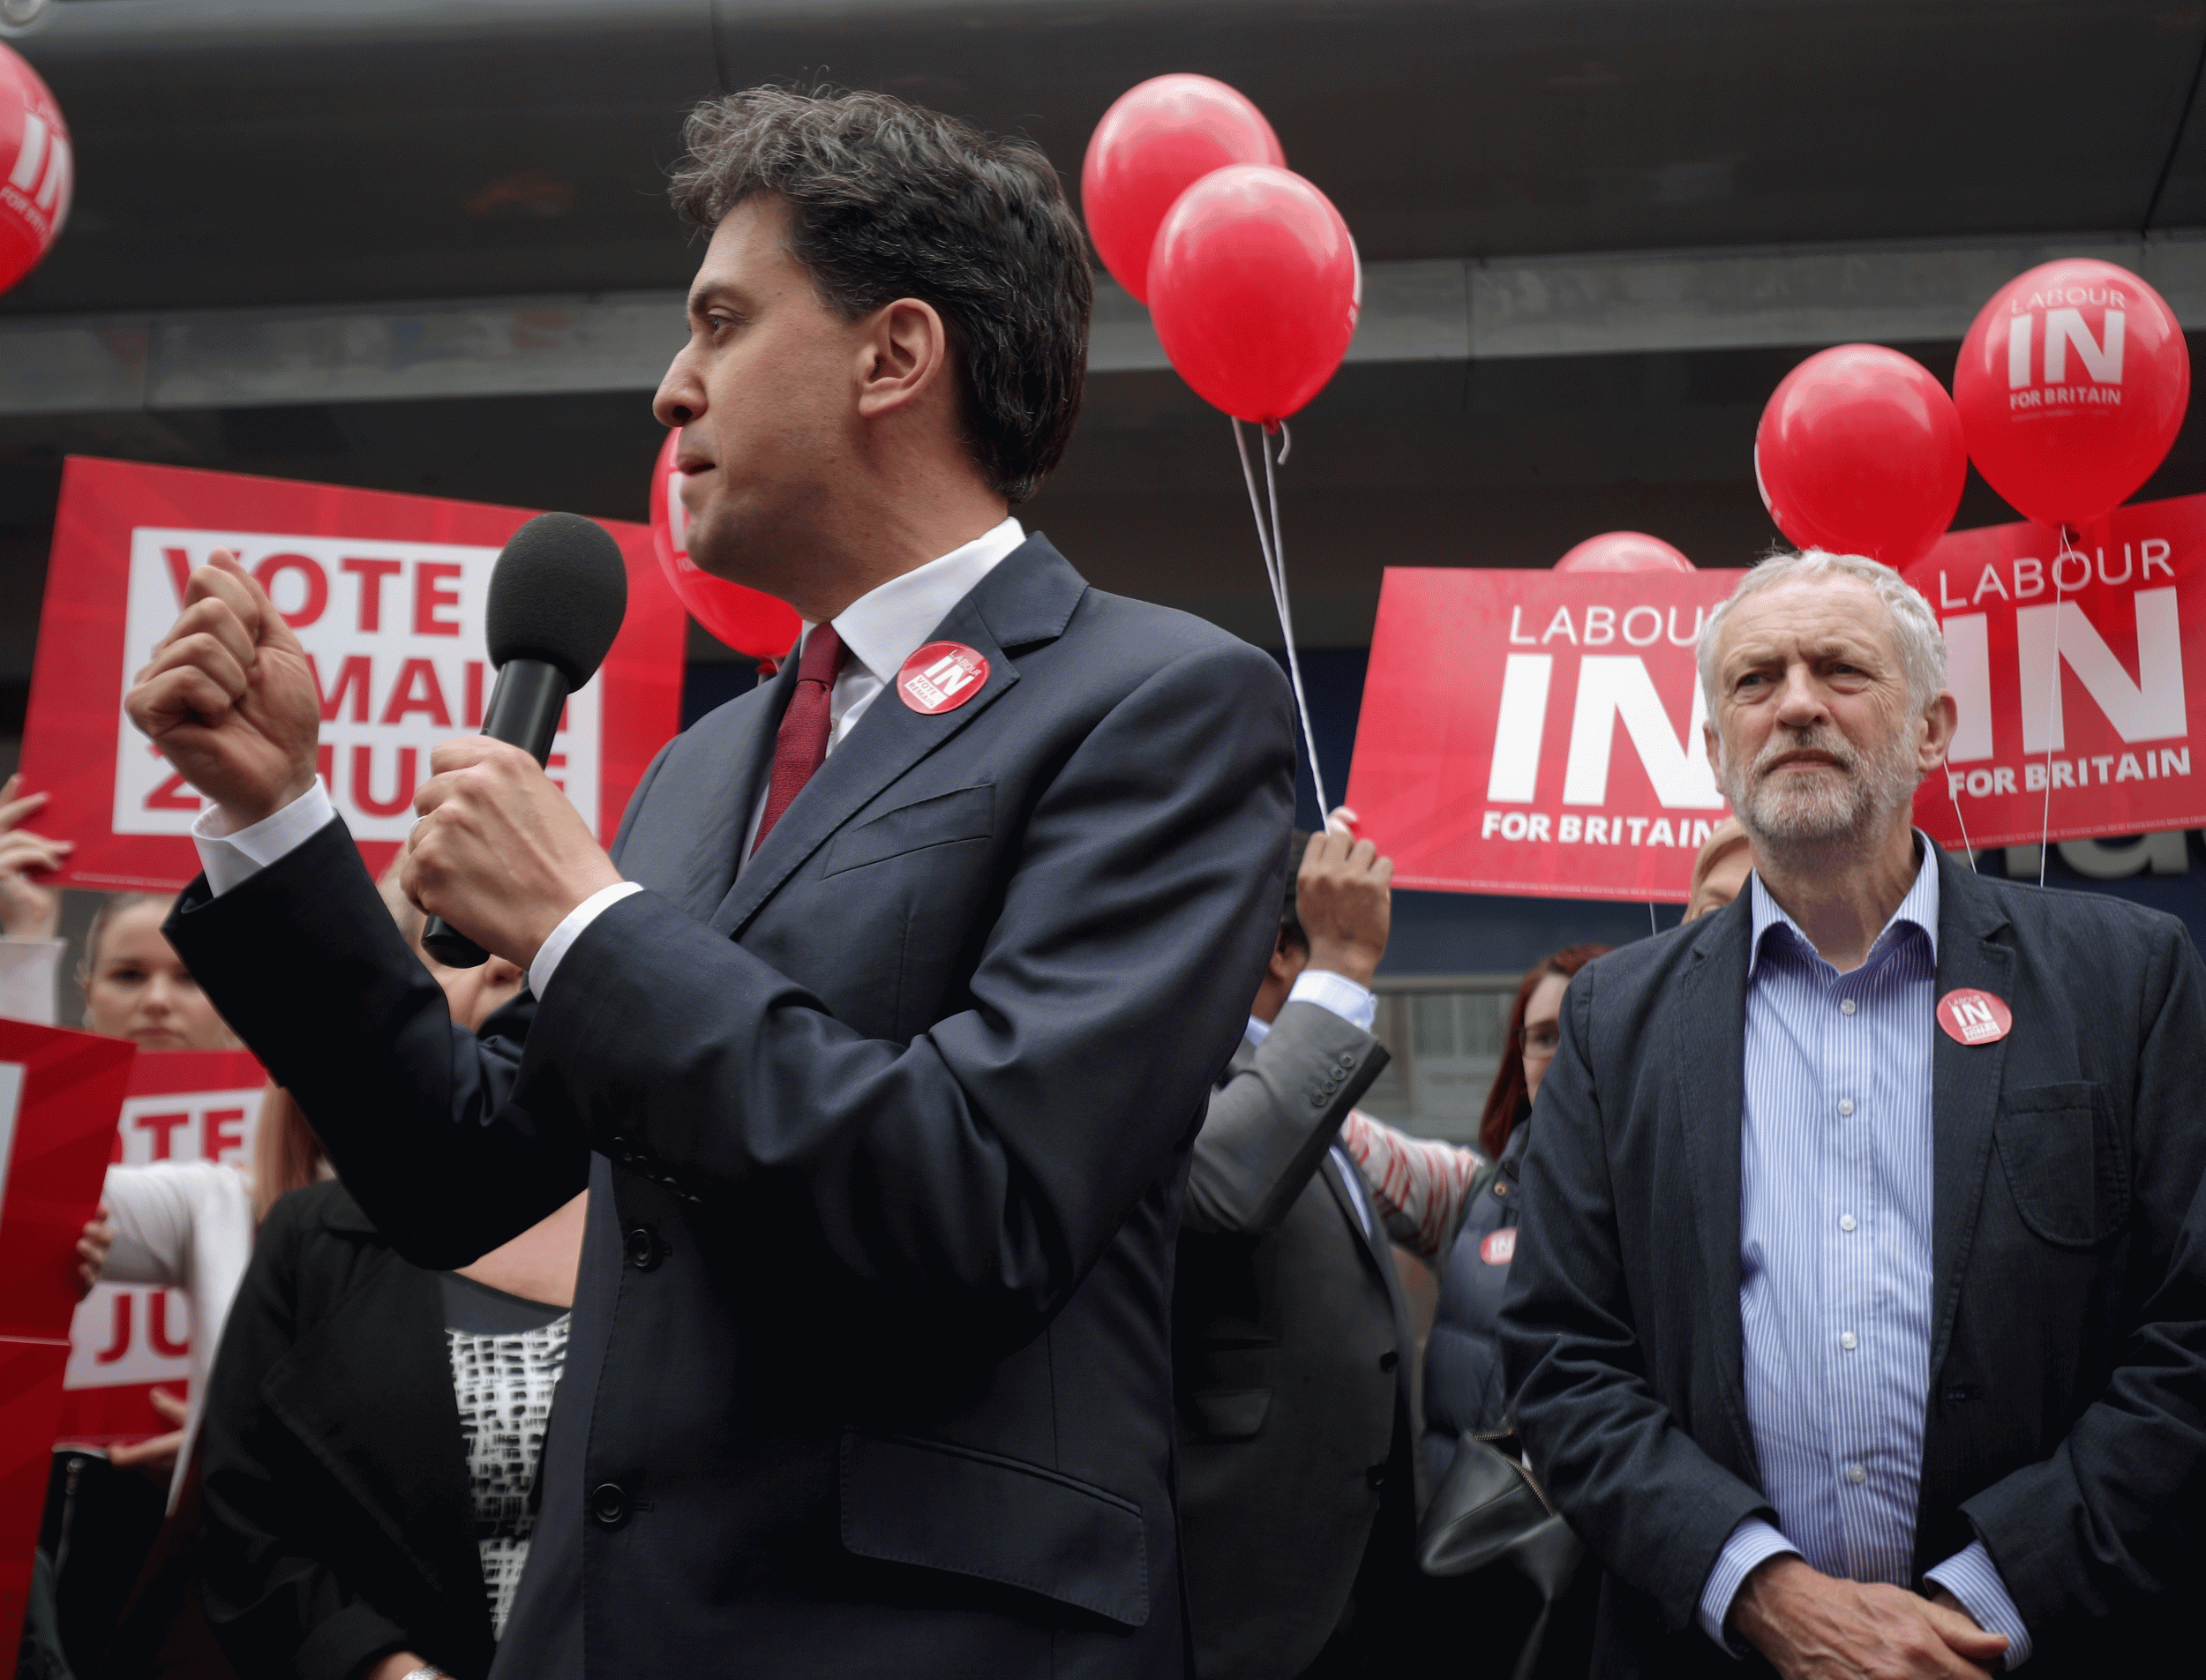 Miliband and Corbyn had their first major appearance together on Friday